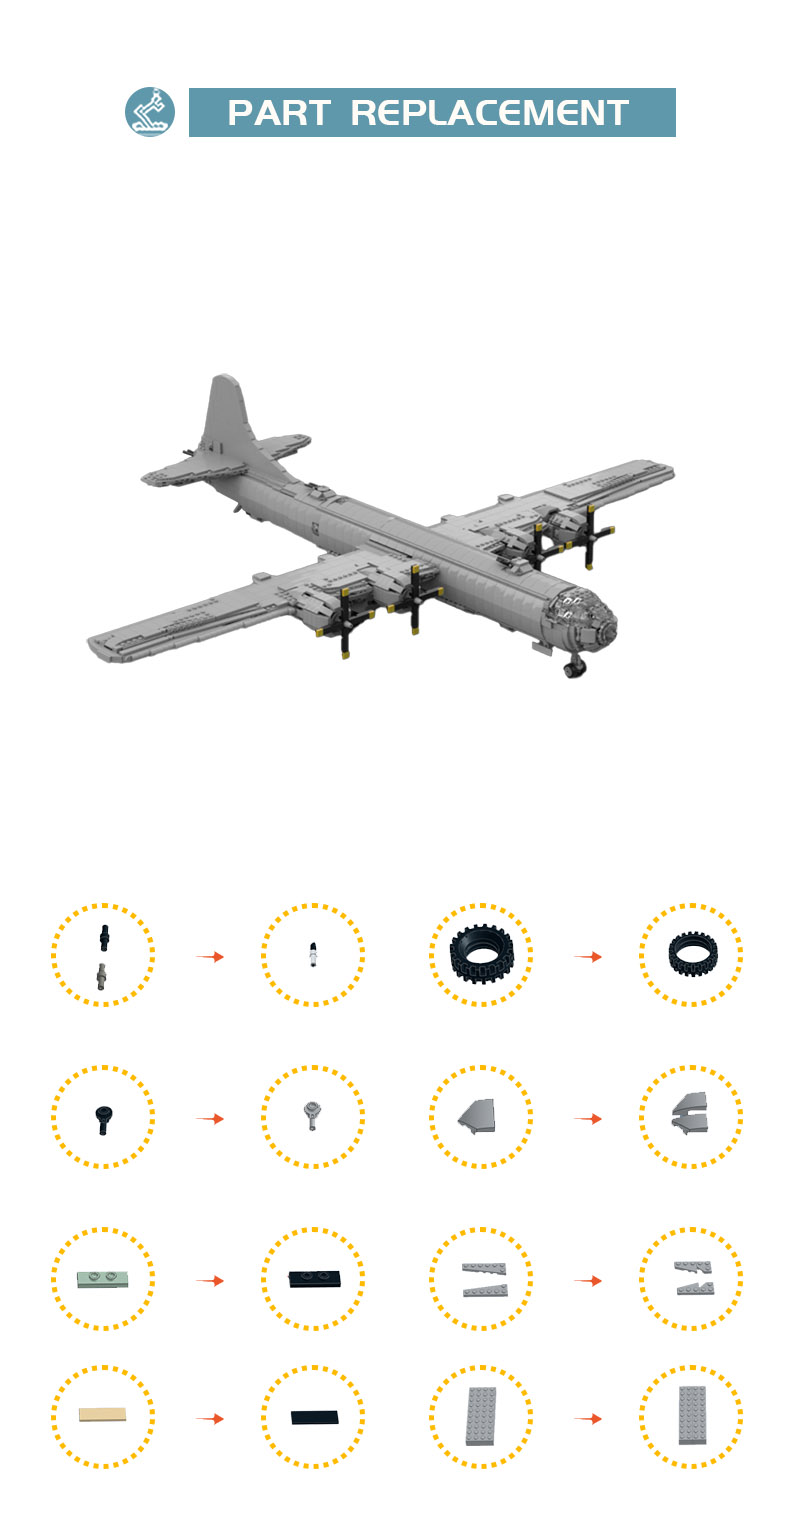 B-29 Superfortress 1:35 Scale WWII Long-Range Bomber MOC-119970 Military With 3096 Pieces